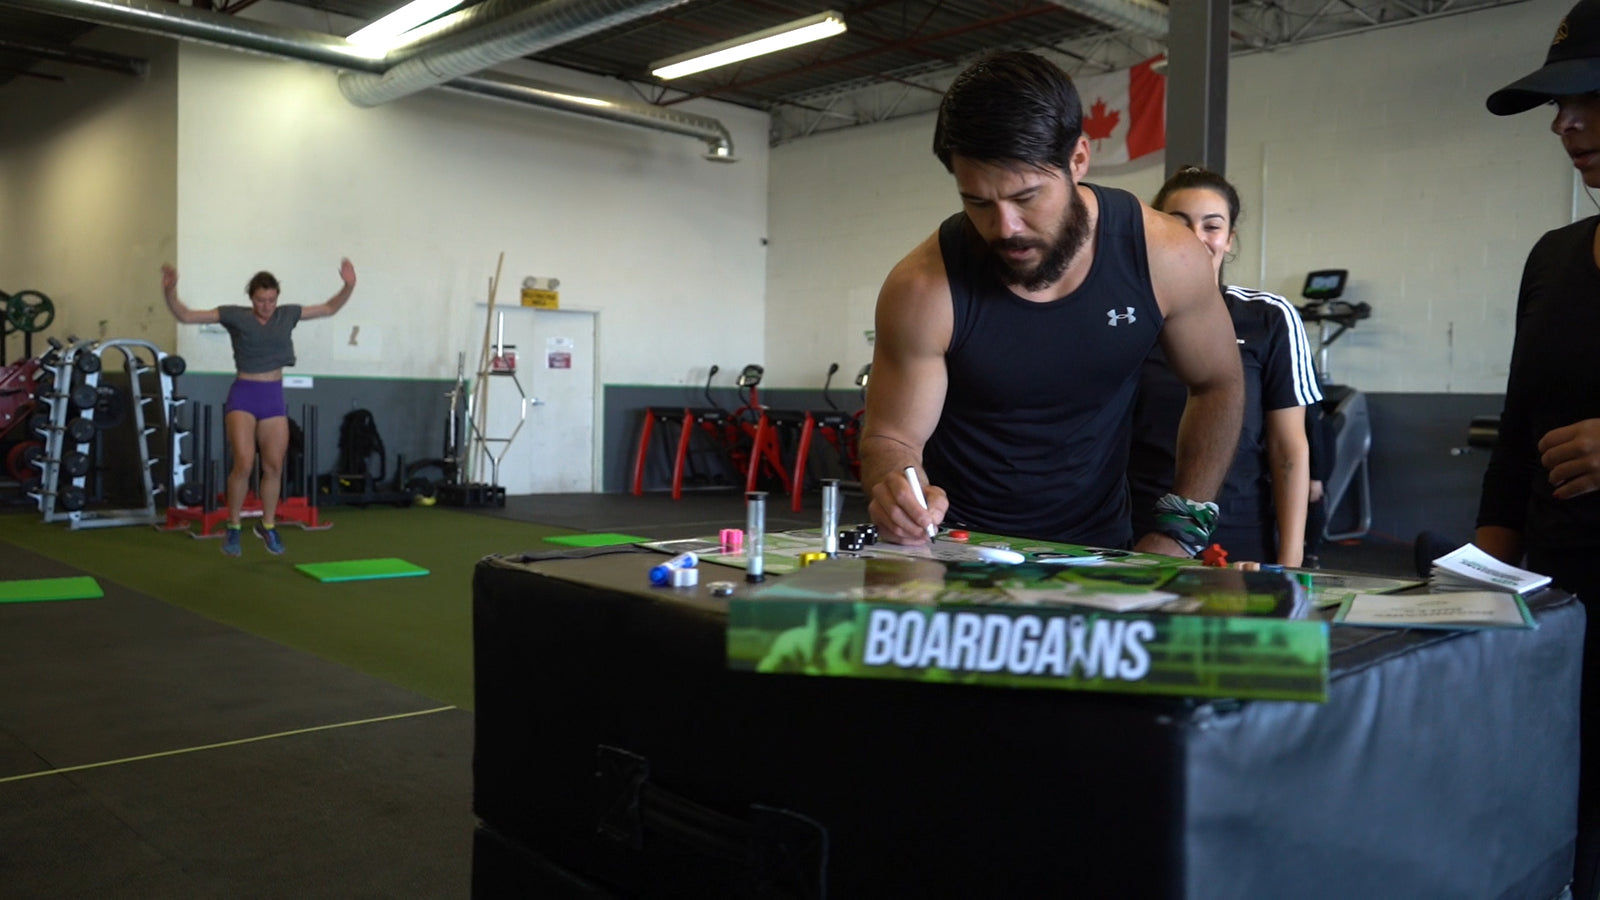 Bring Fun and Fitness Together: Introducing Boardgains Group Bookings at Local Gyms | Generate Leads and Boost Revenue